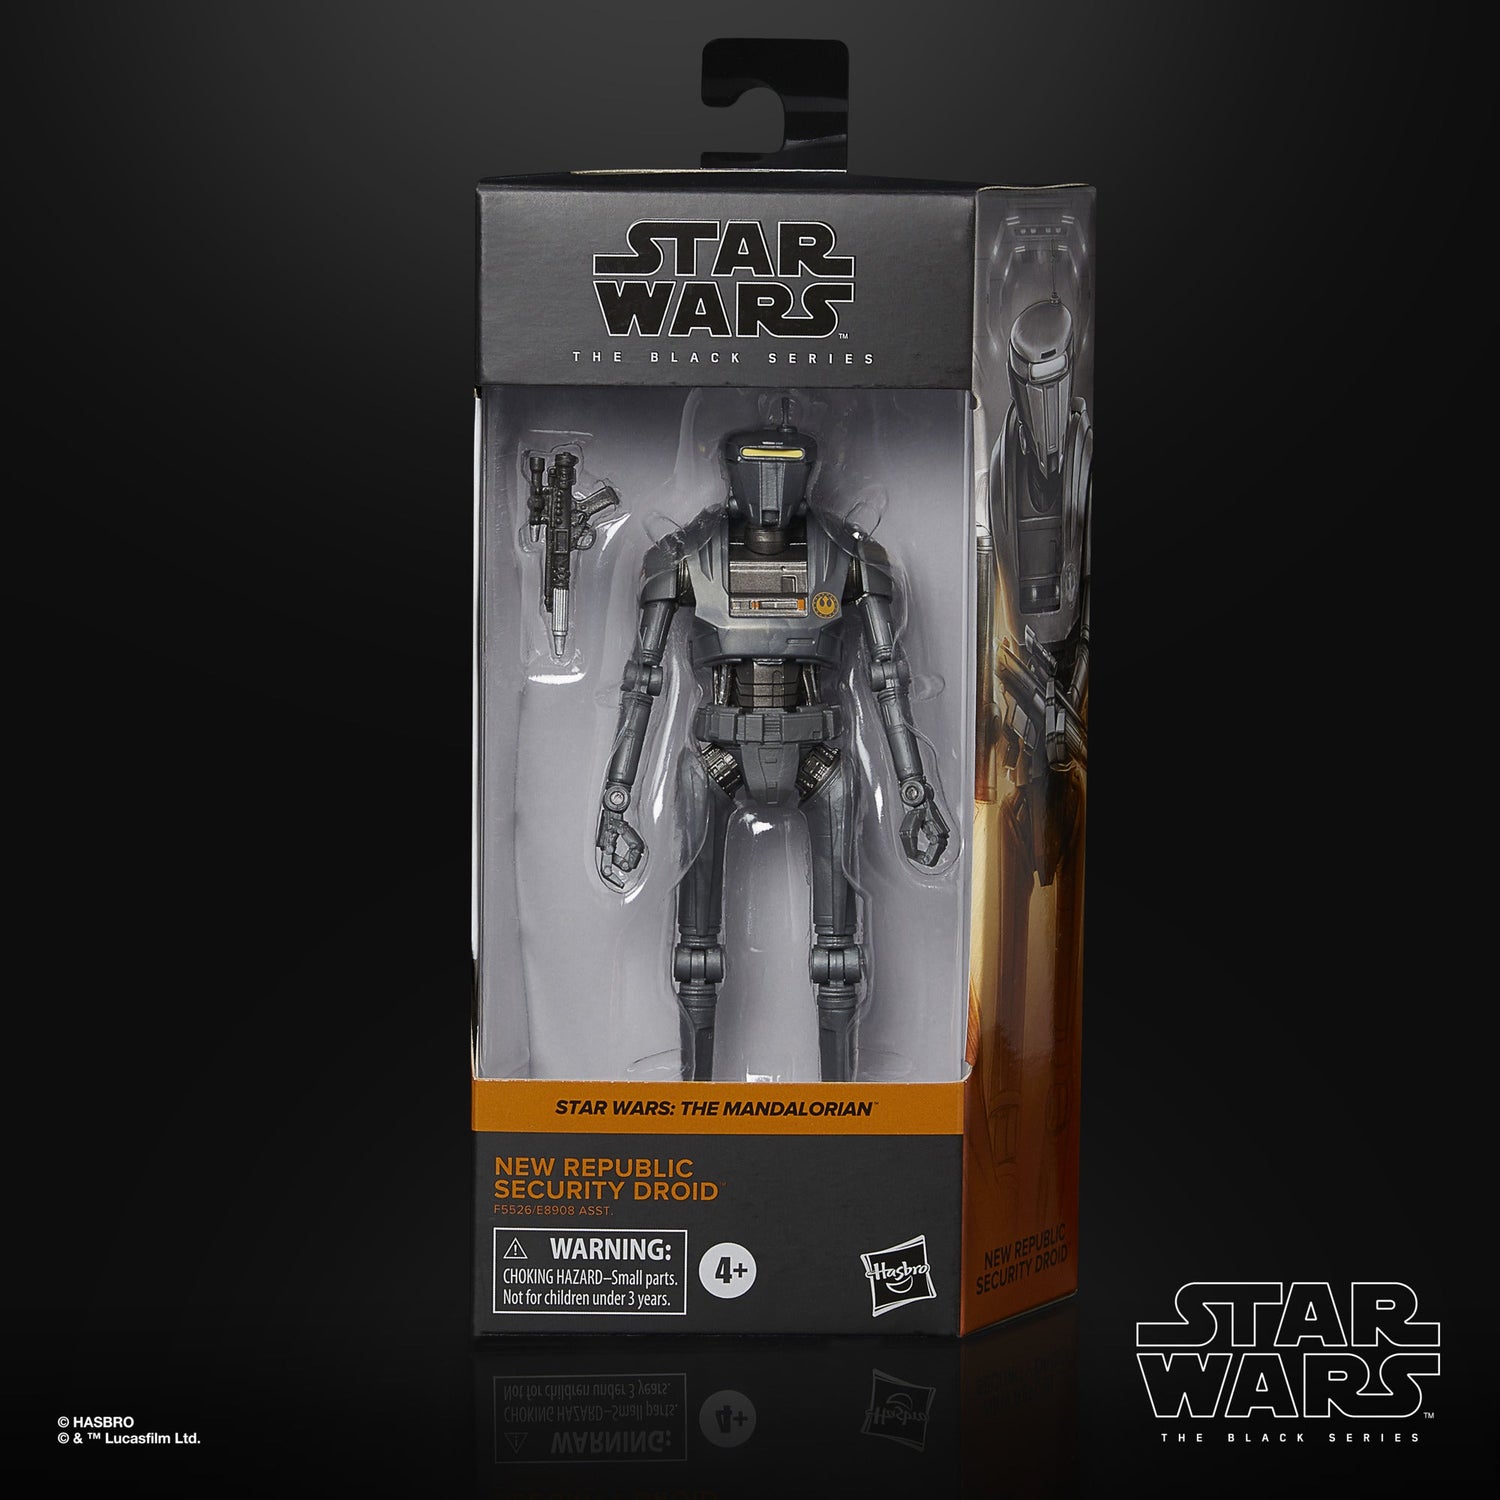 Star Wars: The Black Series New Republic Security Droid Hasbro No Protector Case